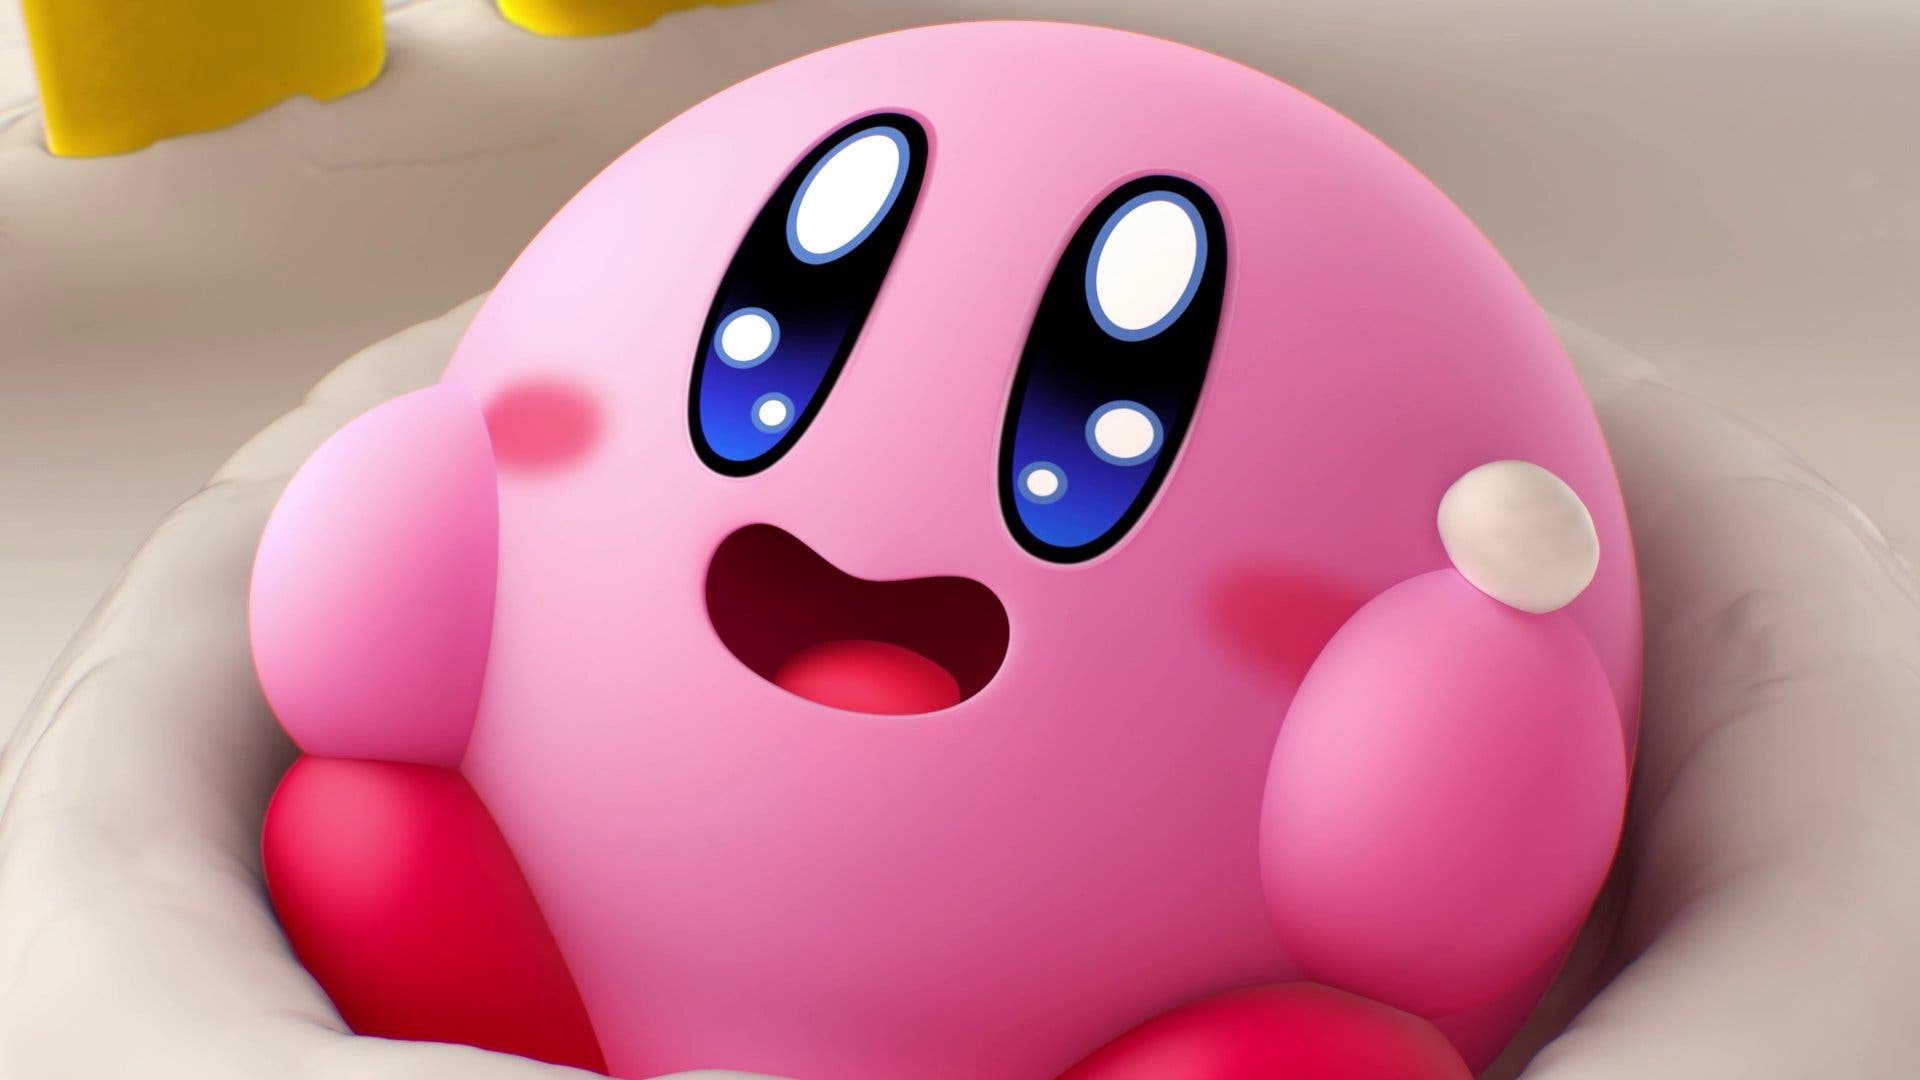 Kirby is even rounder in Kirby’s Dream Buffet: the number of vertices proves it